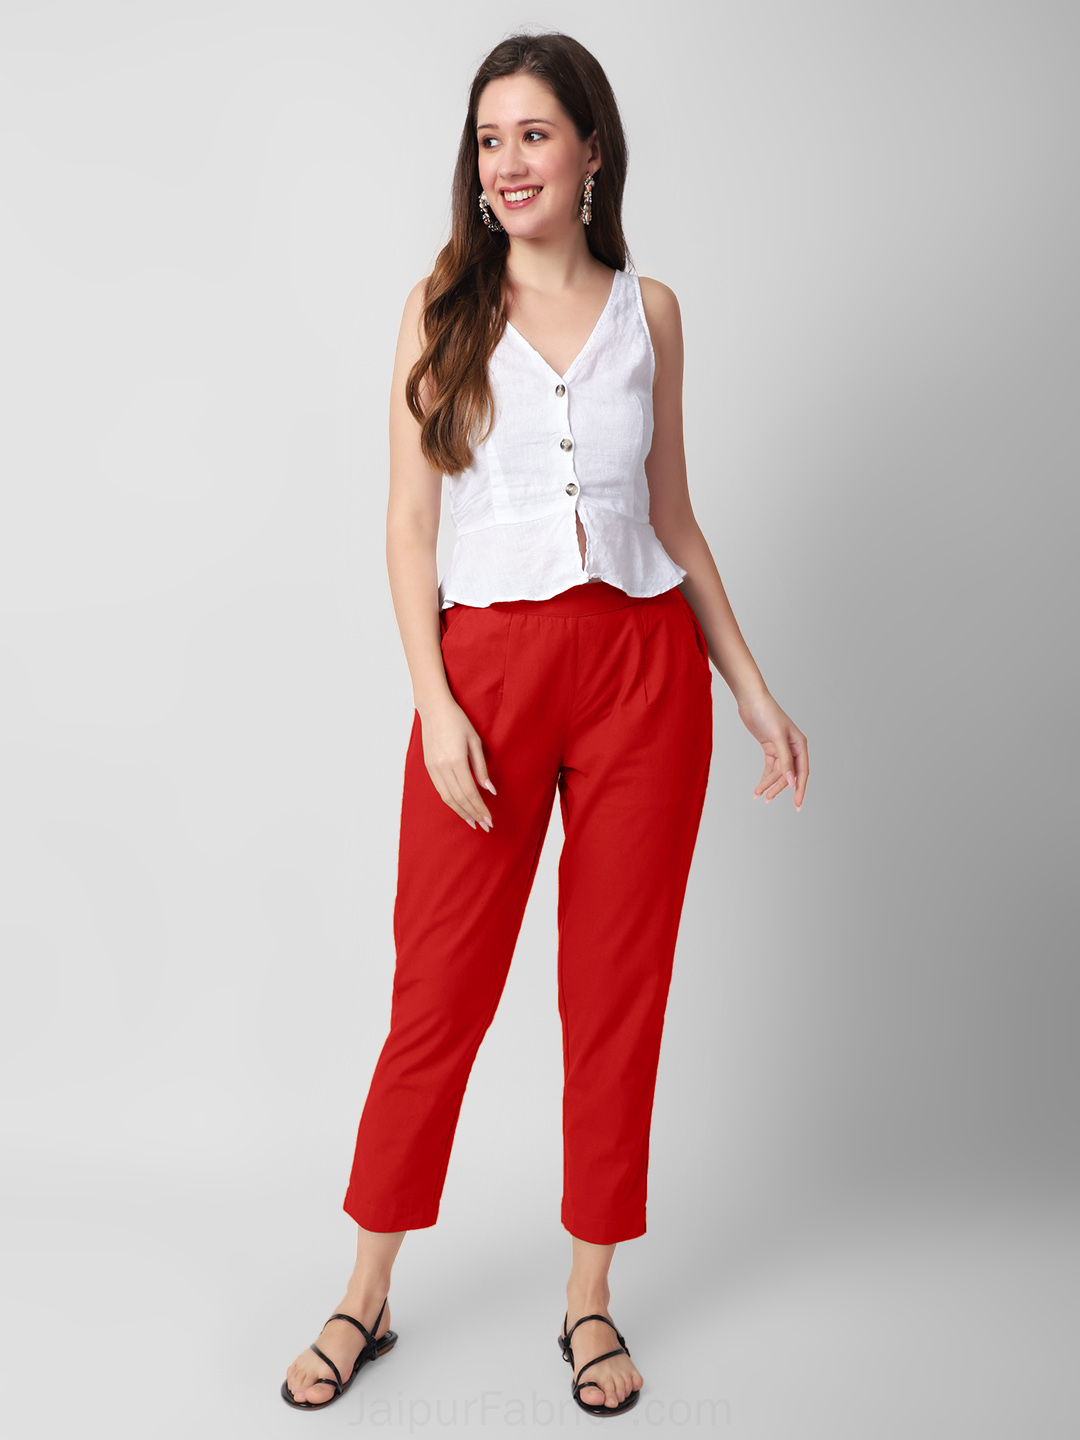 Scarlet Comfort Women Cotton Pants casual and semi formal daily